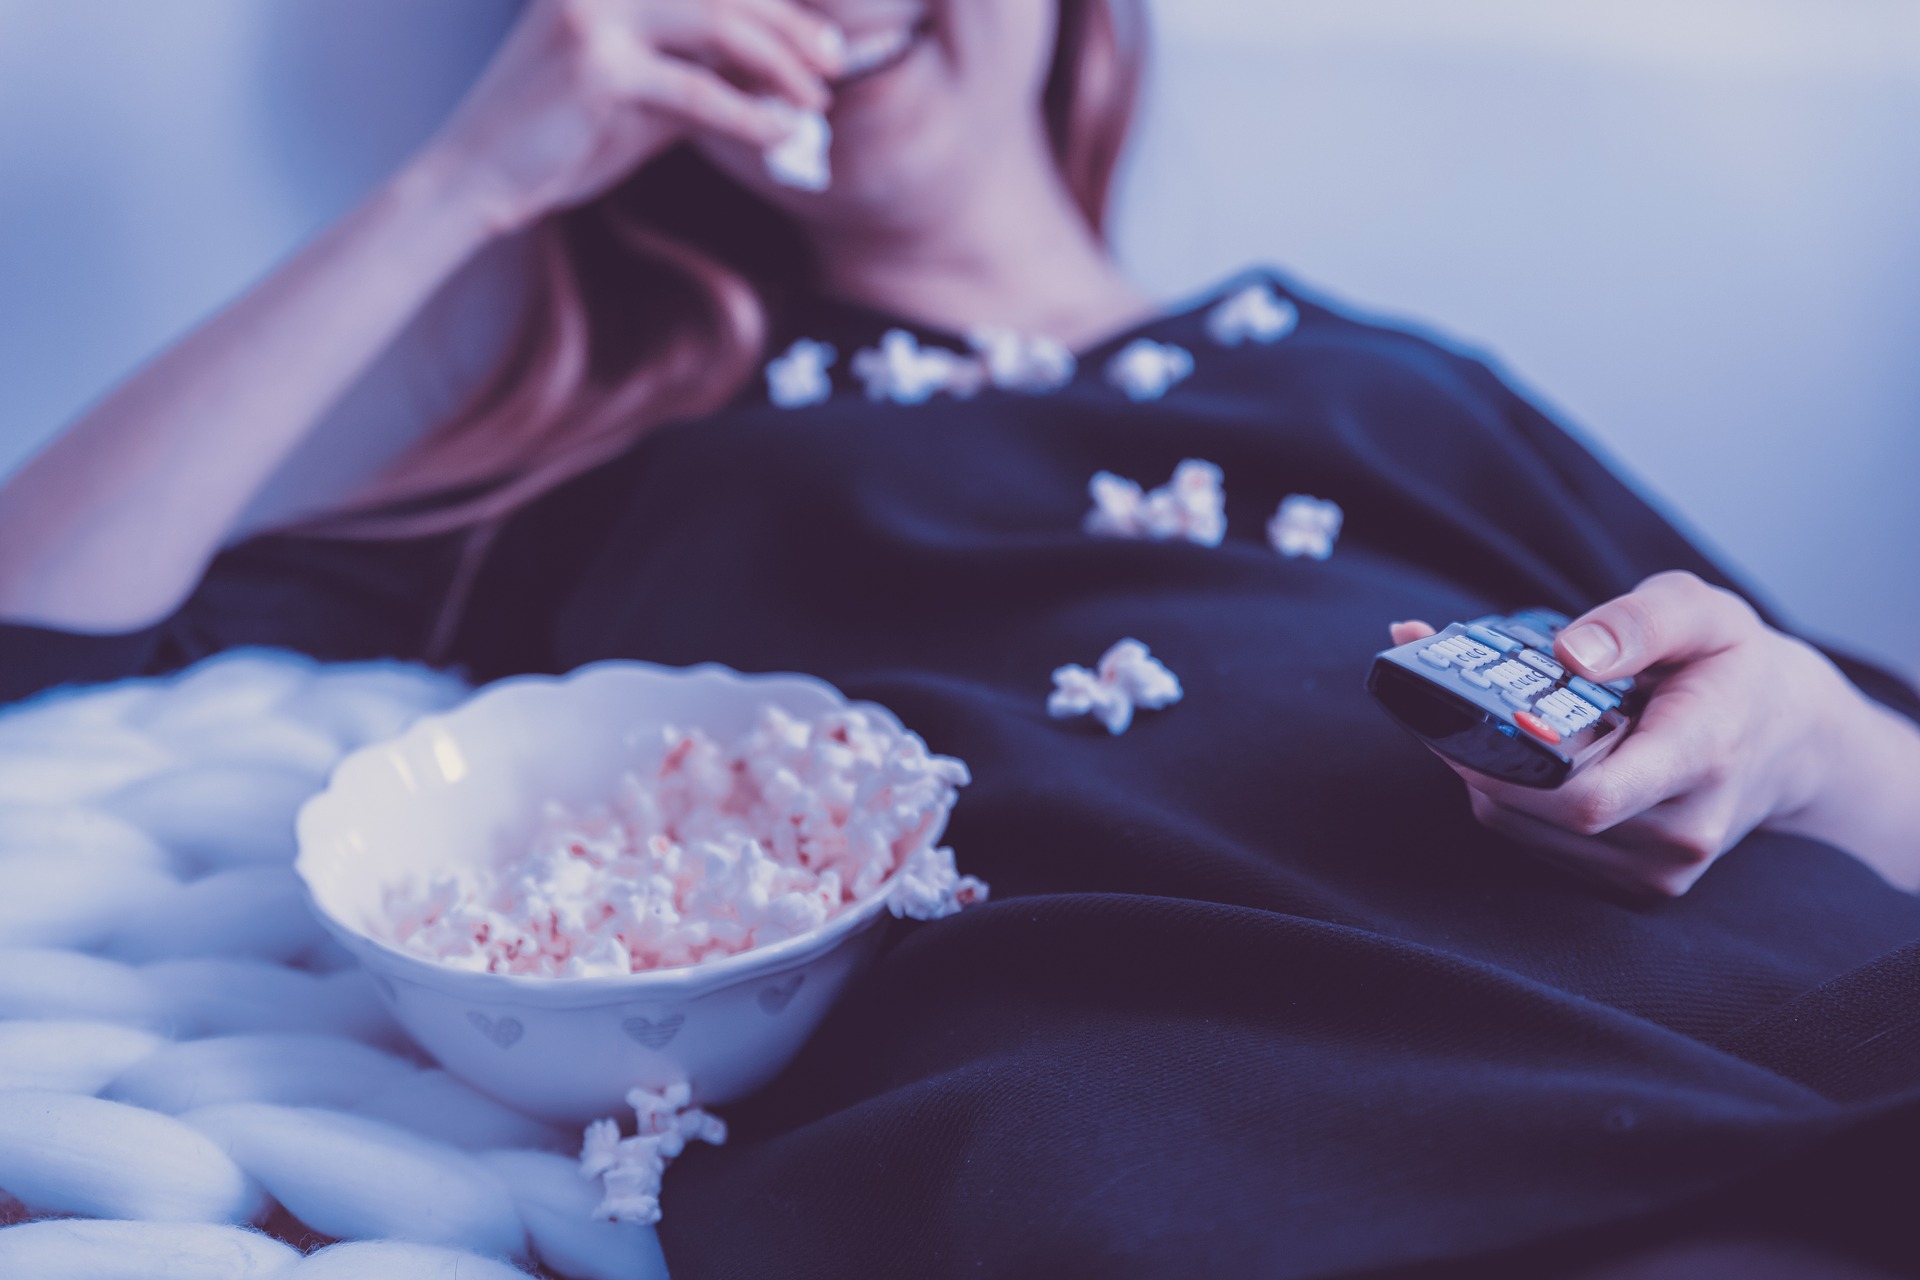 woman spills popcorn on herself while holding TV remote